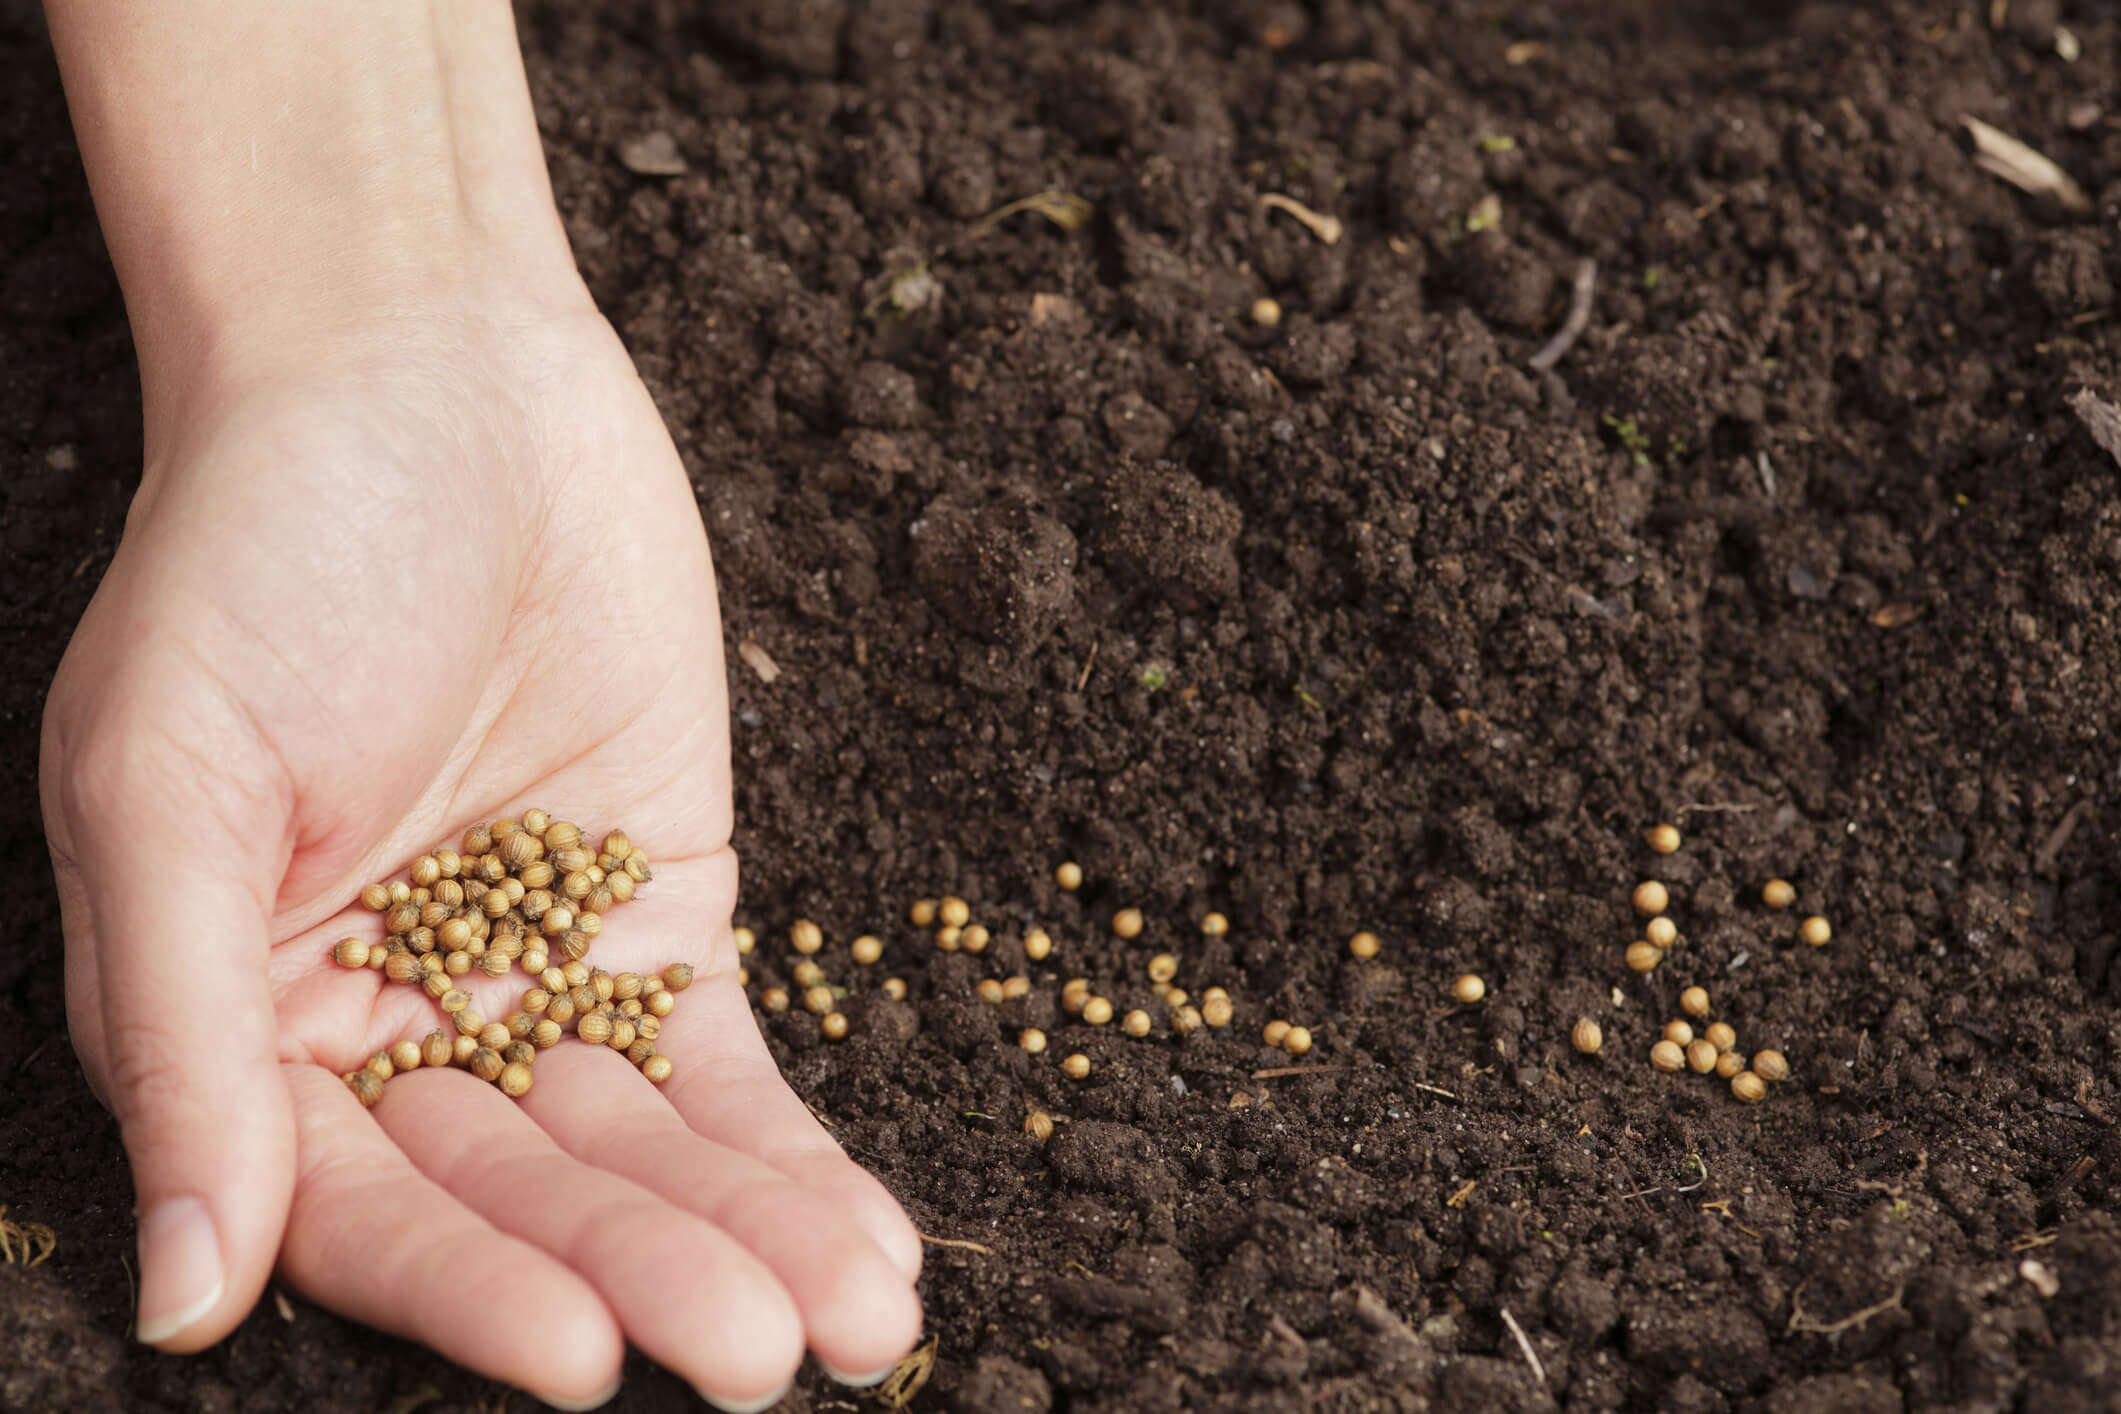 a hand holding seeds and sowing them in soil